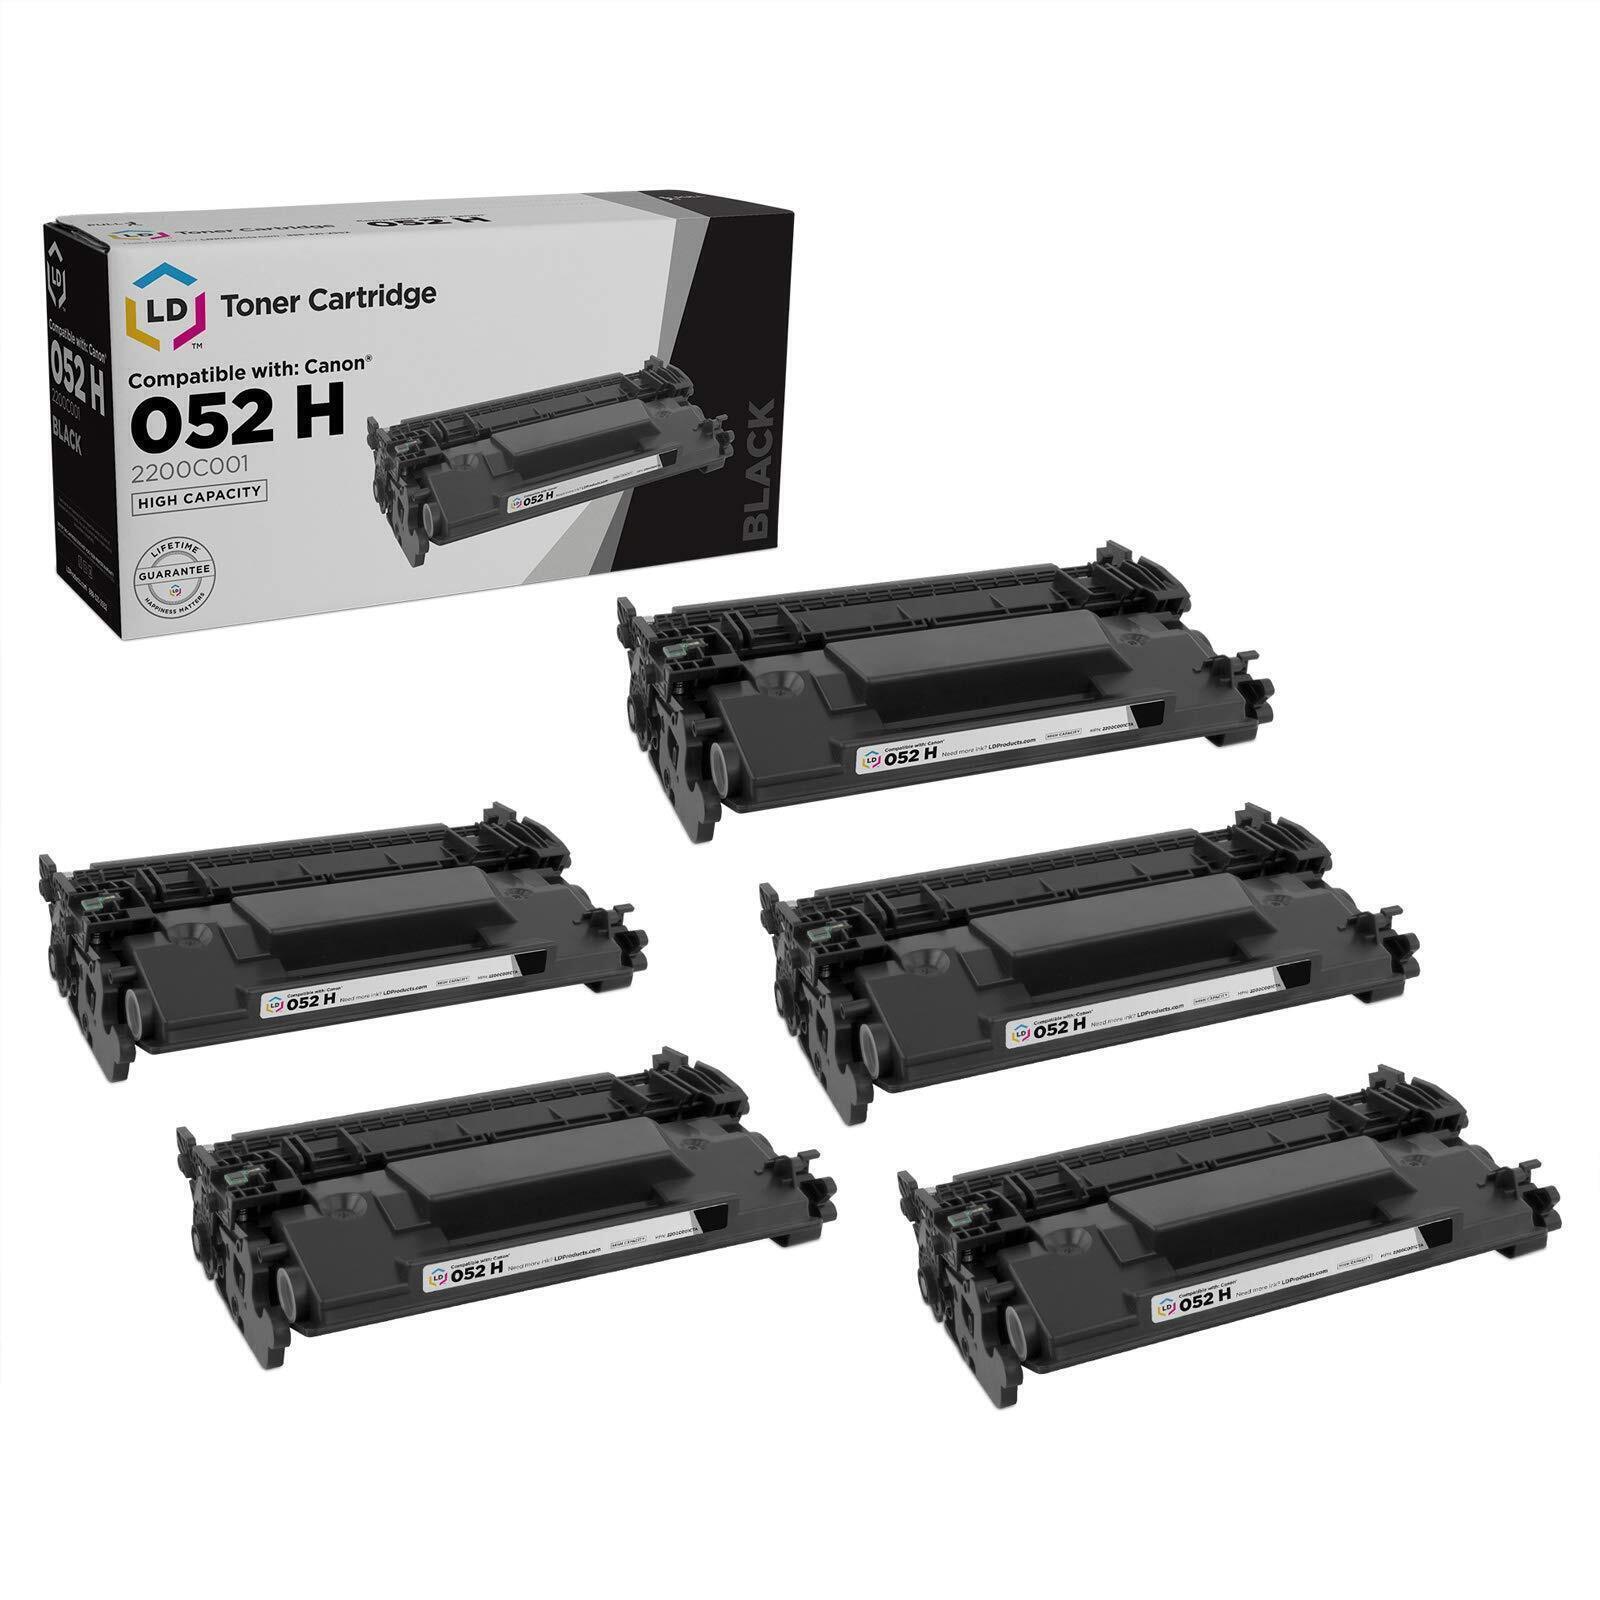 LD Compatible Replacement for Canon 052H High Yield Black Toner Cartridges 5PK